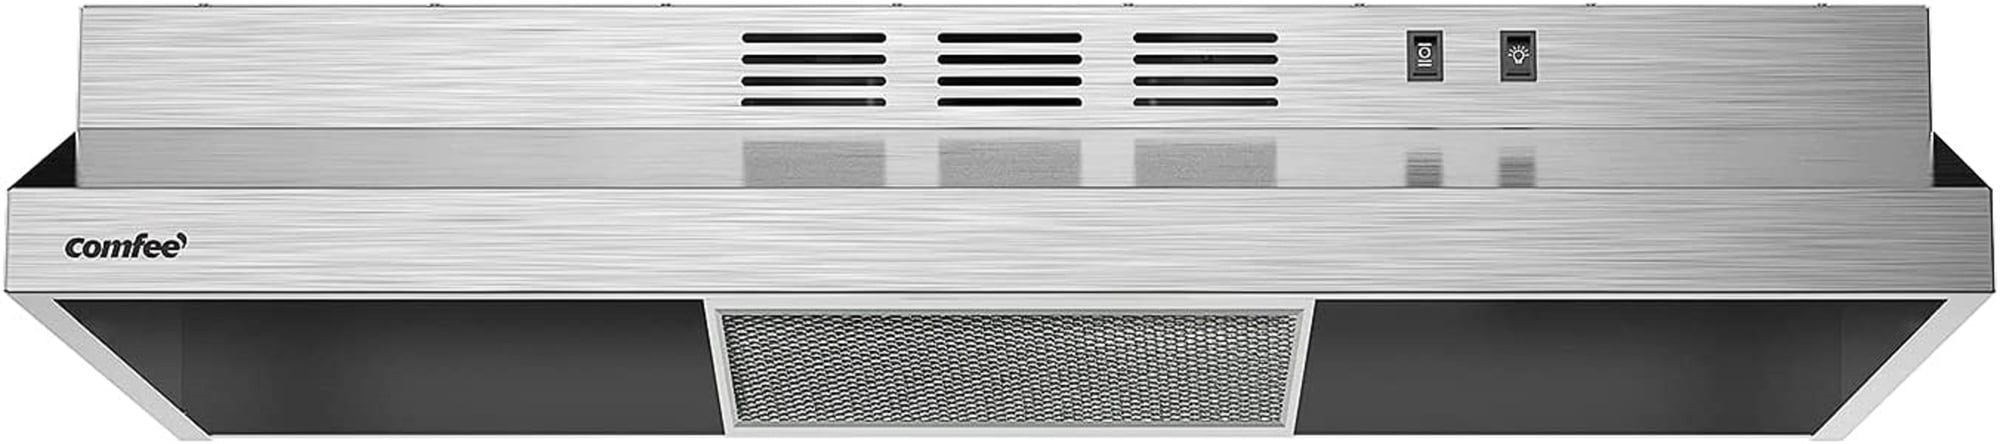 Comfee F13 Range Hood 30 Inch Ducted Ductless Vent Hood Durable Stainless  Steel